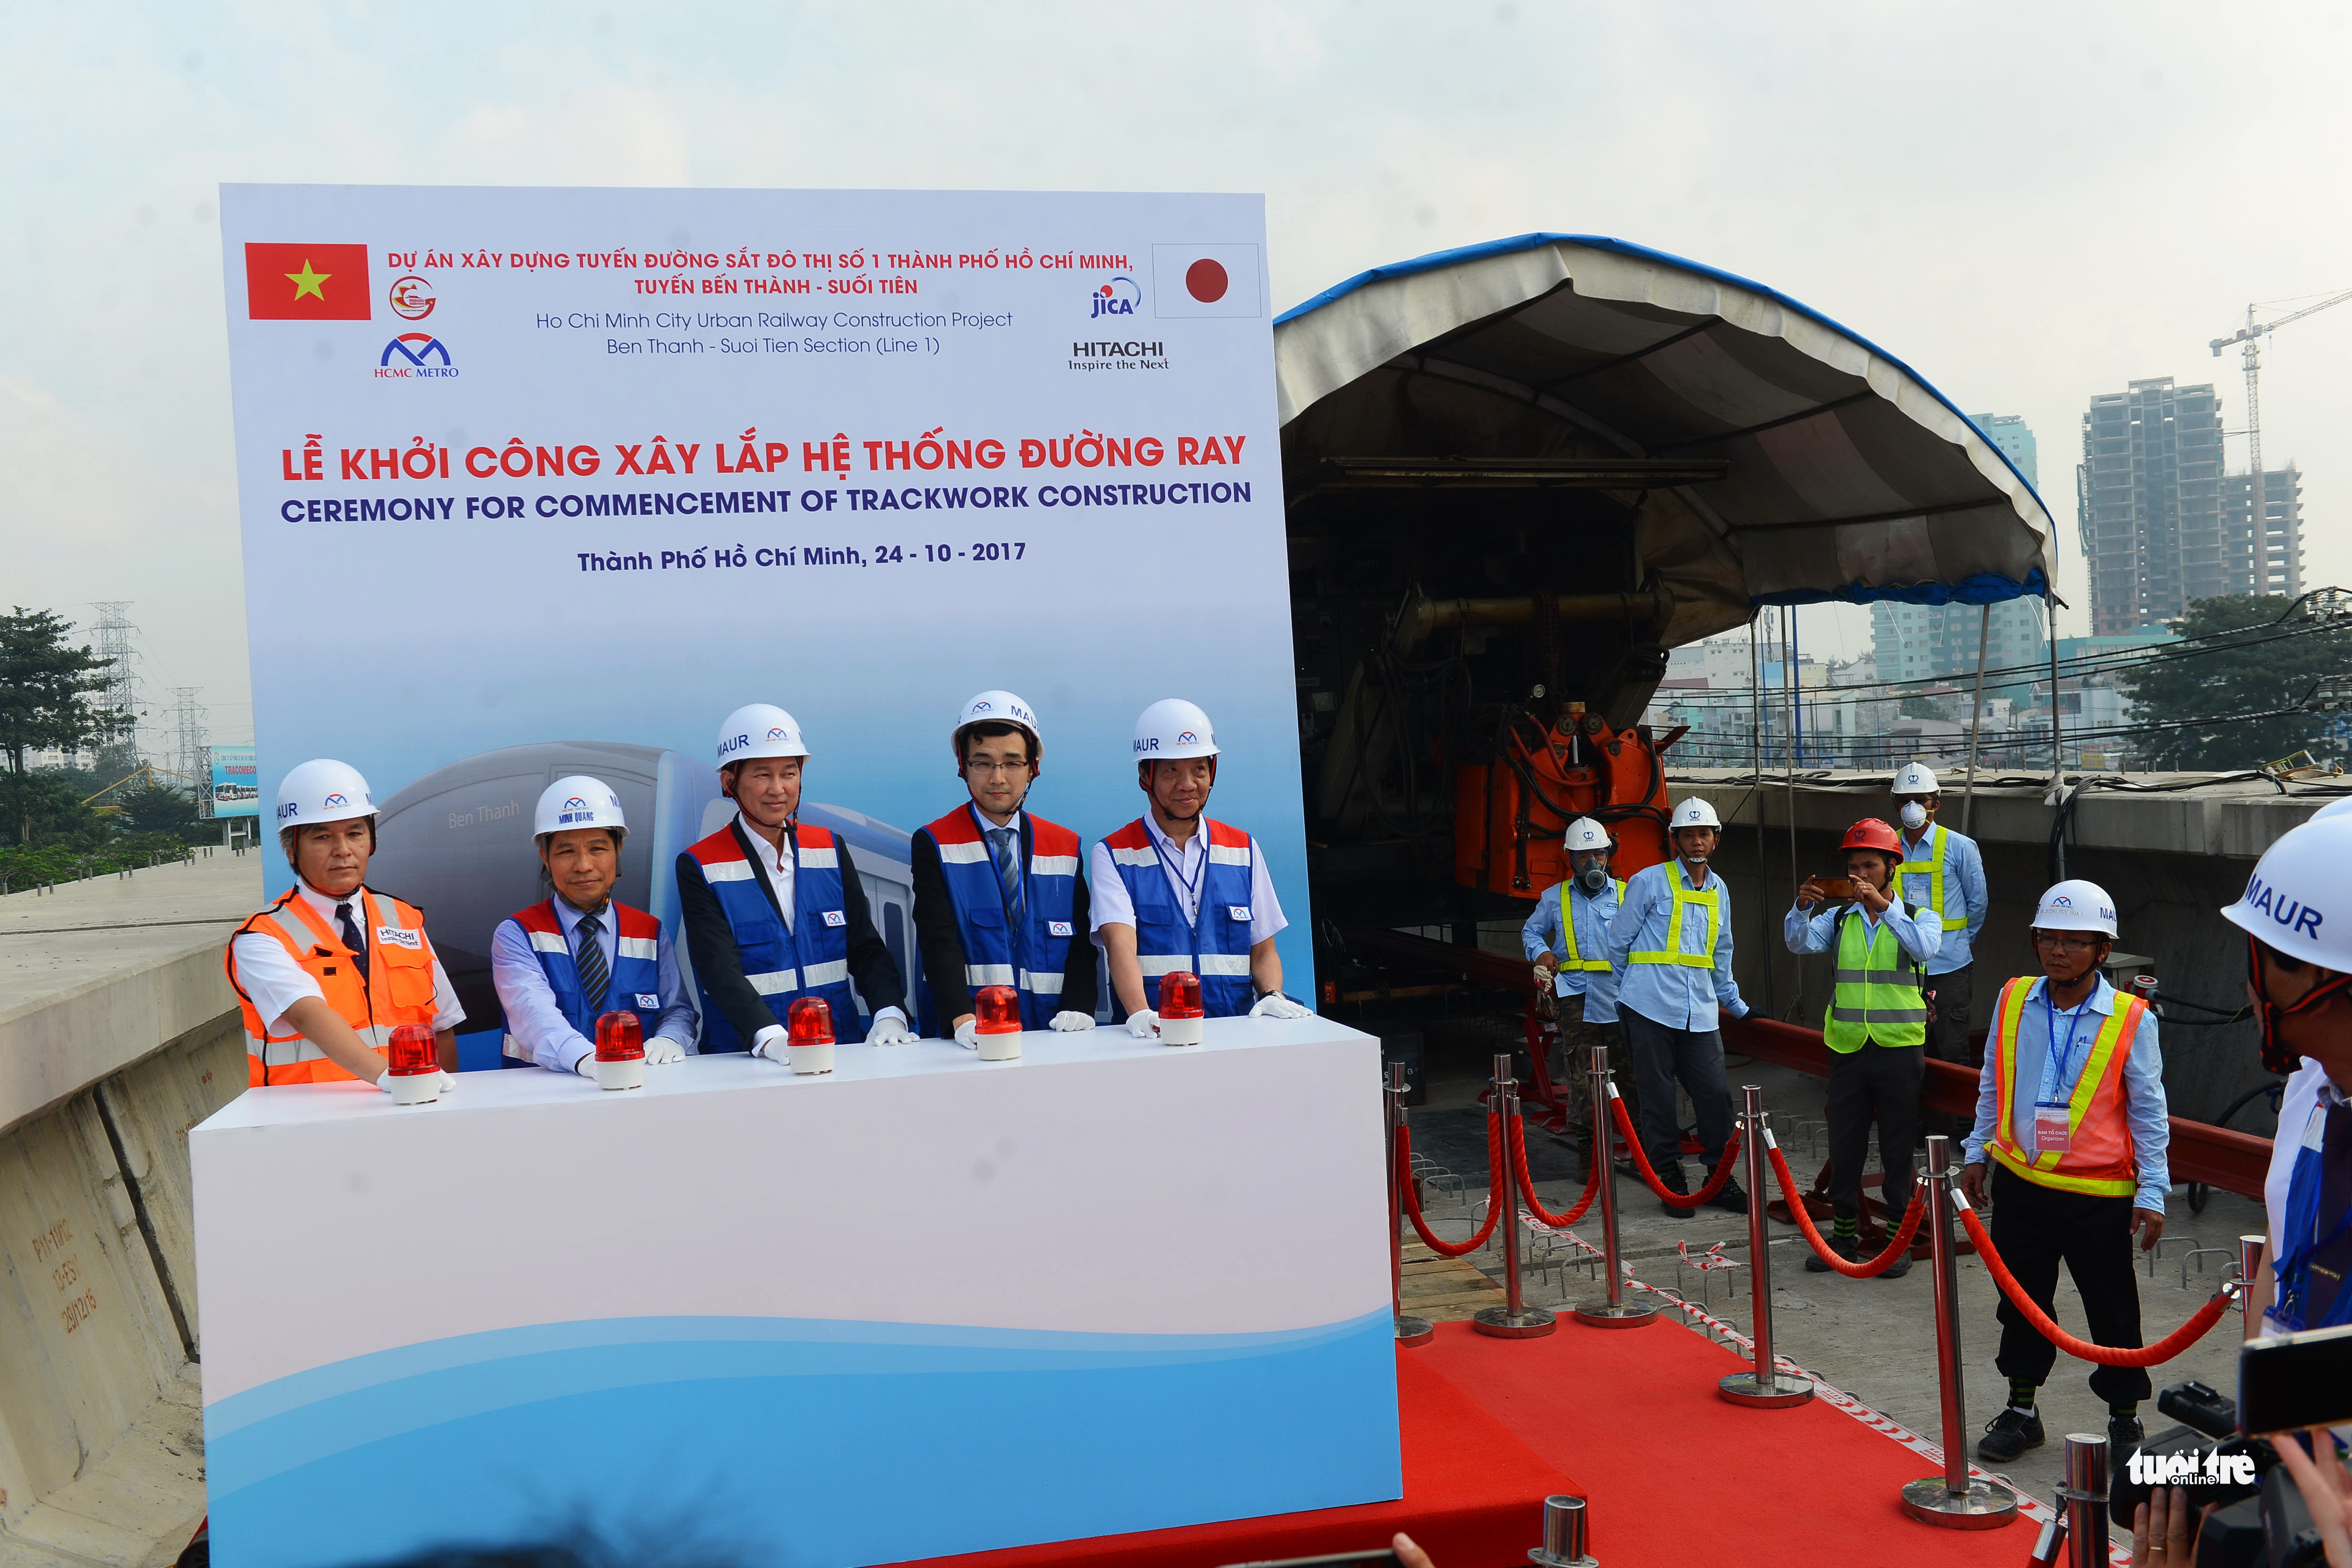 Delegates at a button-pressing ceremony to mark the commencement of track work on Ho Chi Minh City’s first metro line, October 24, 2017. Photo: Tuoi Tre